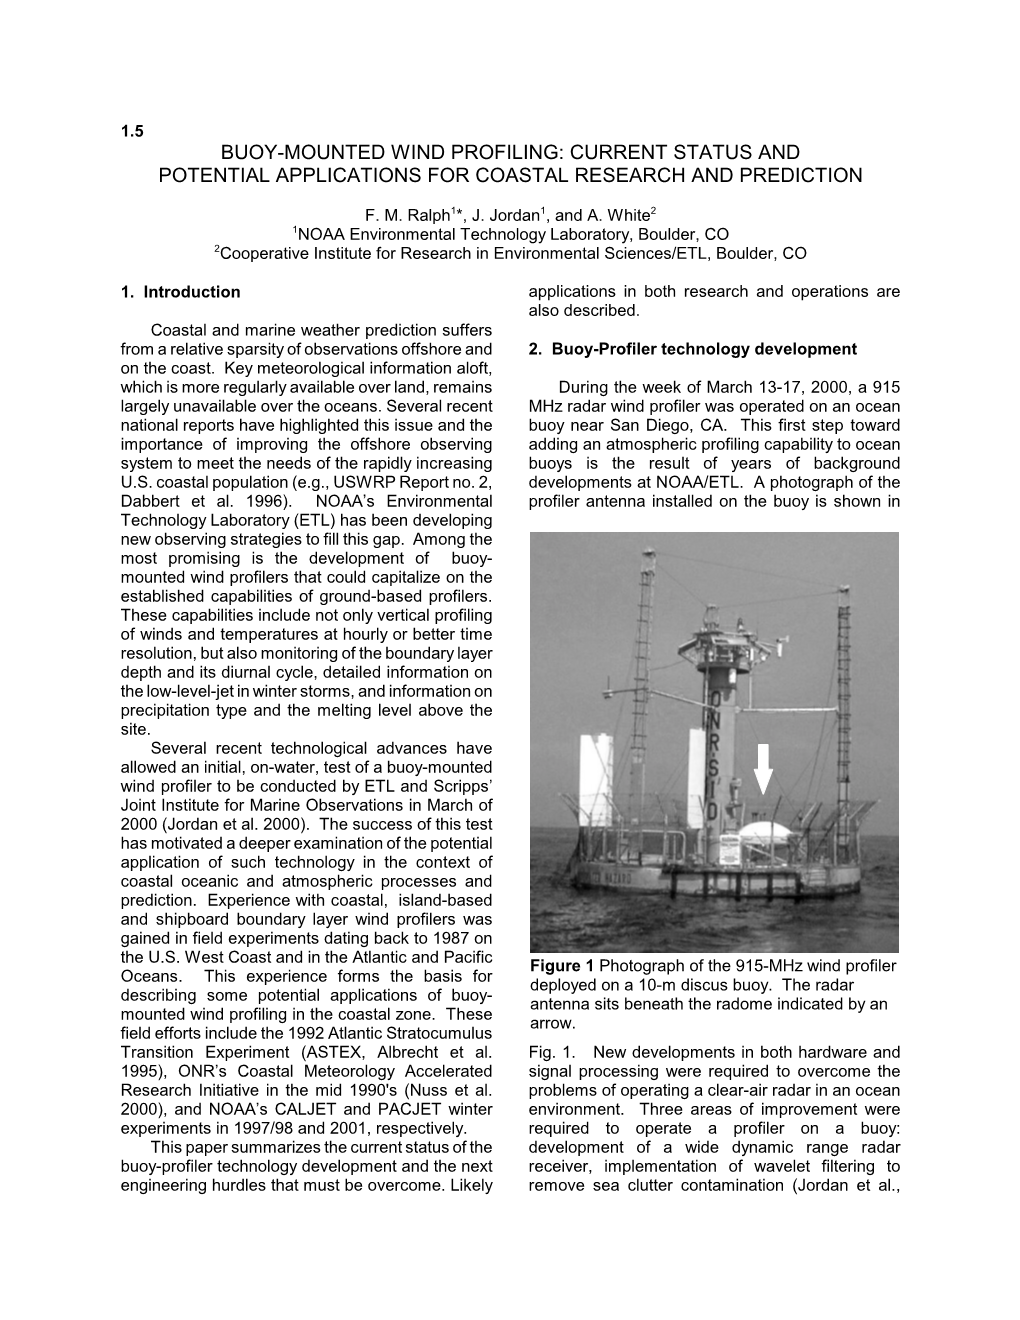 Buoy-Mounted Wind Profiling: Current Status and Potential Applications for Coastal Research and Prediction